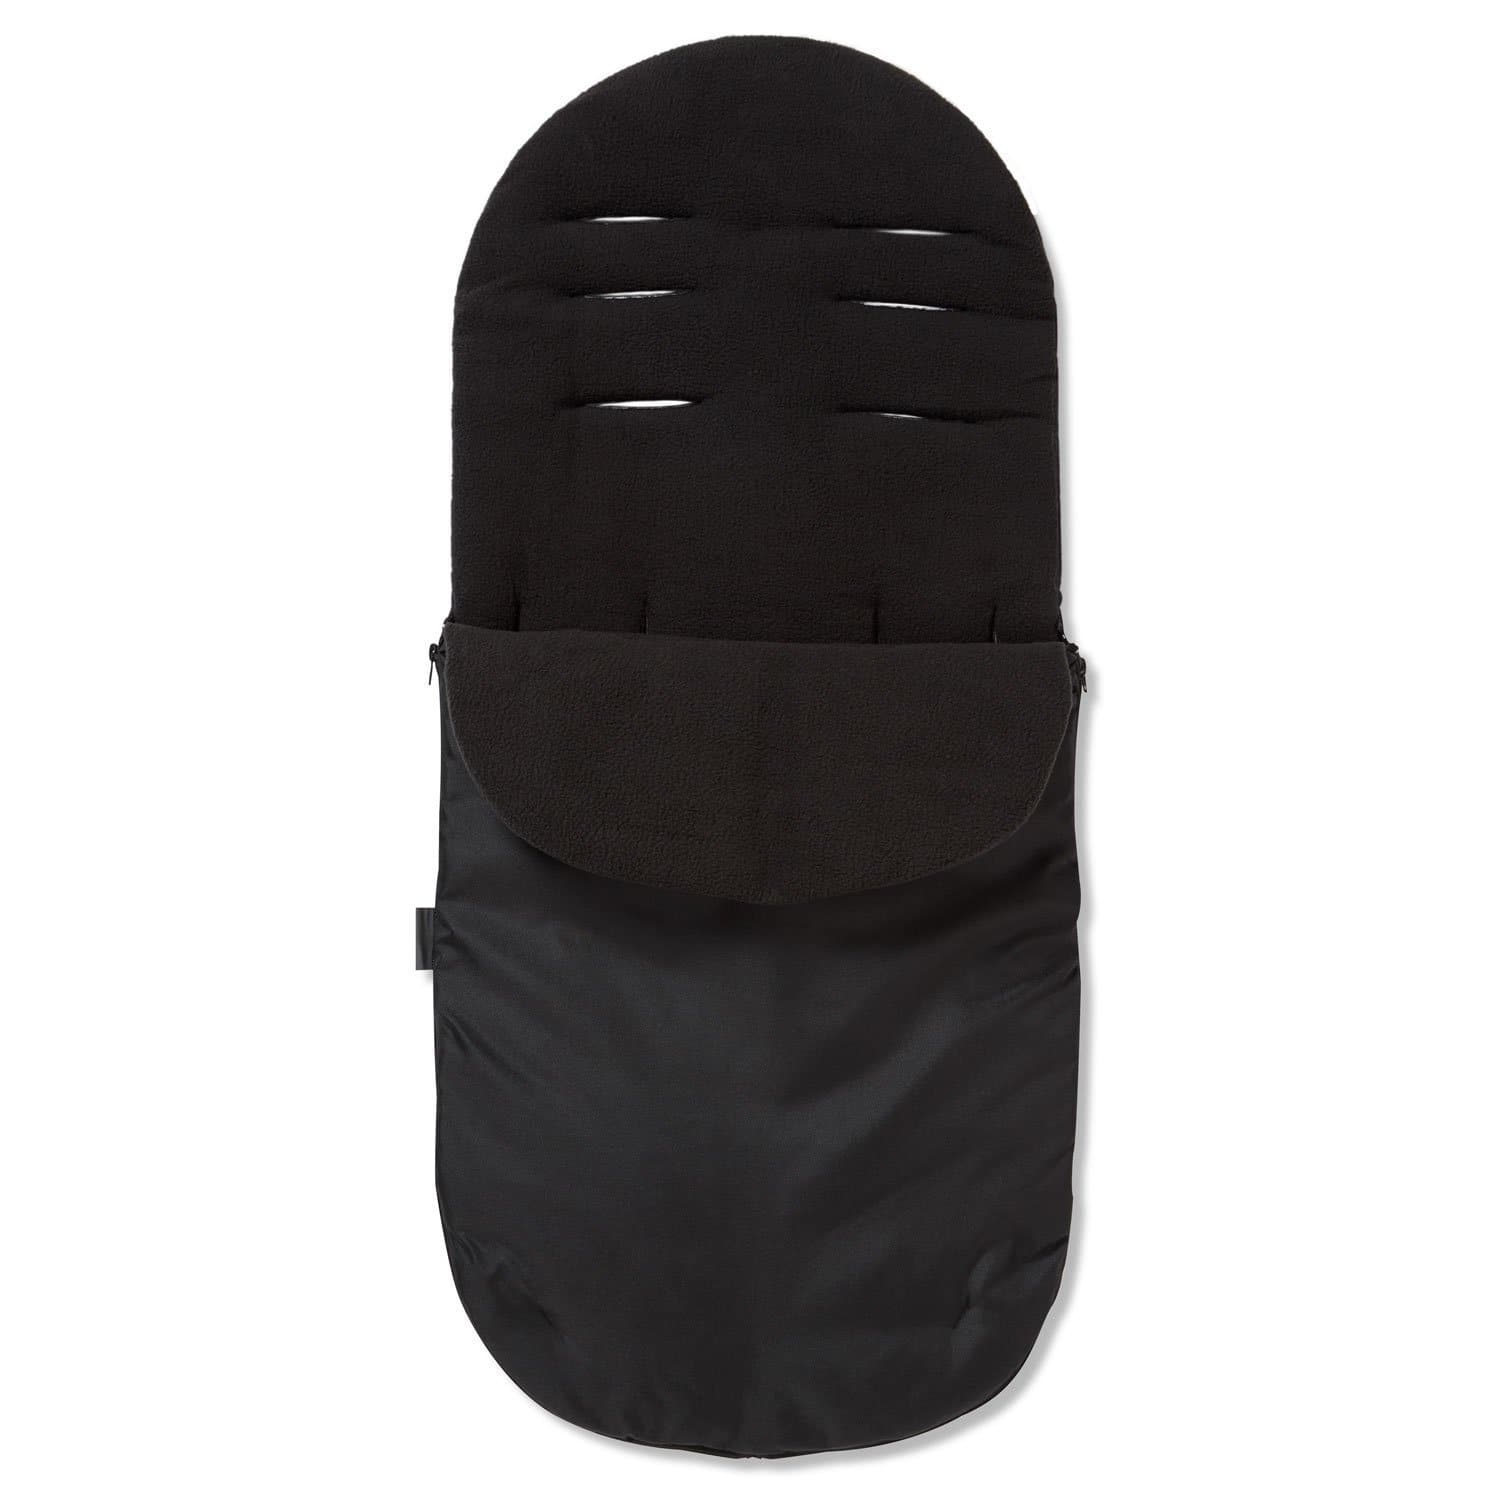 Footmuff / Cosy Toes Compatible with Brevi - Black / Fits All Models | For Your Little One